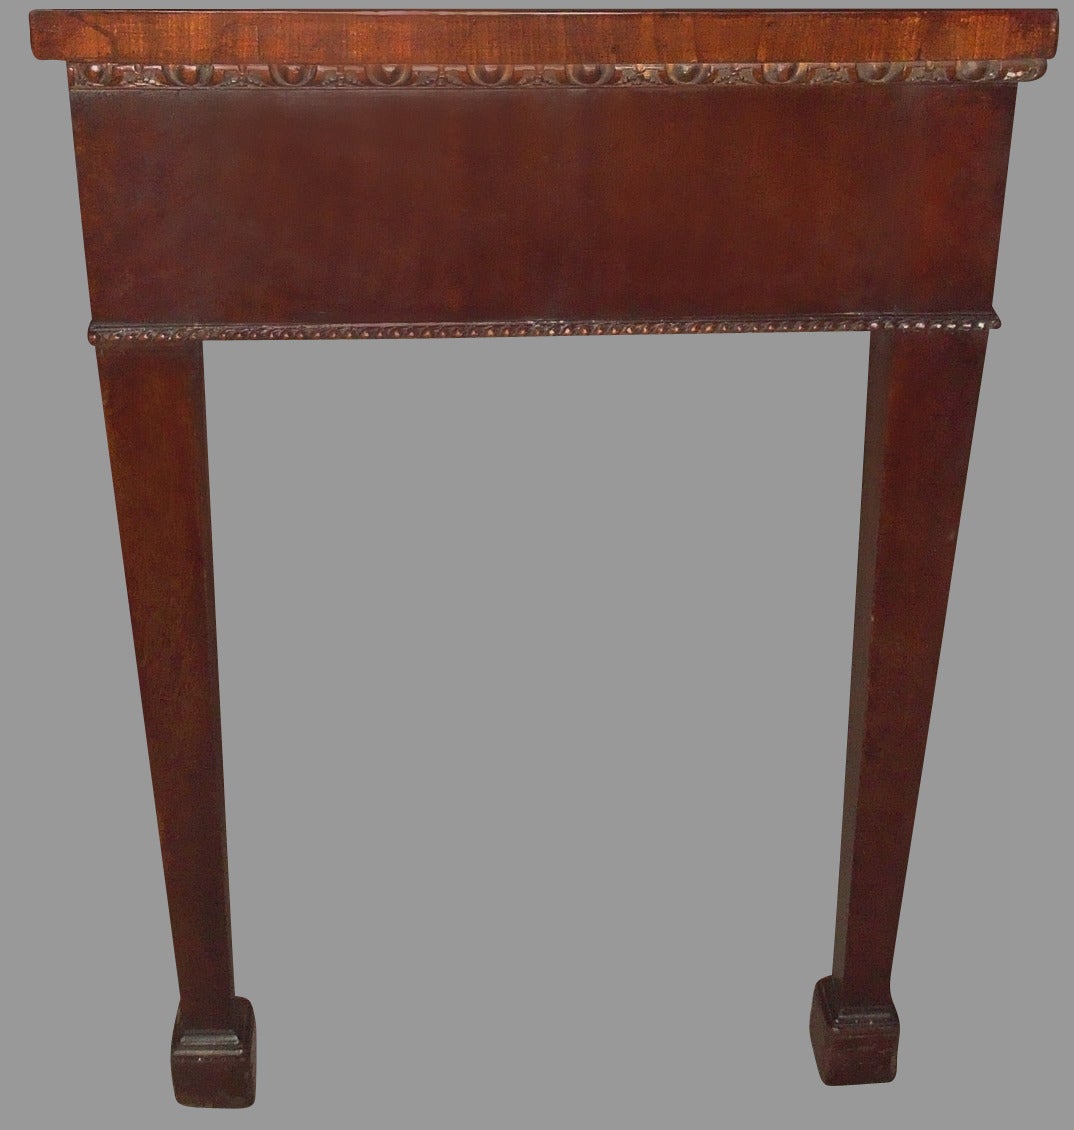 Monumental George III Mahogany Serpentine Serving/Side Table In Good Condition For Sale In Moreton-in-Marsh, Gloucestershire